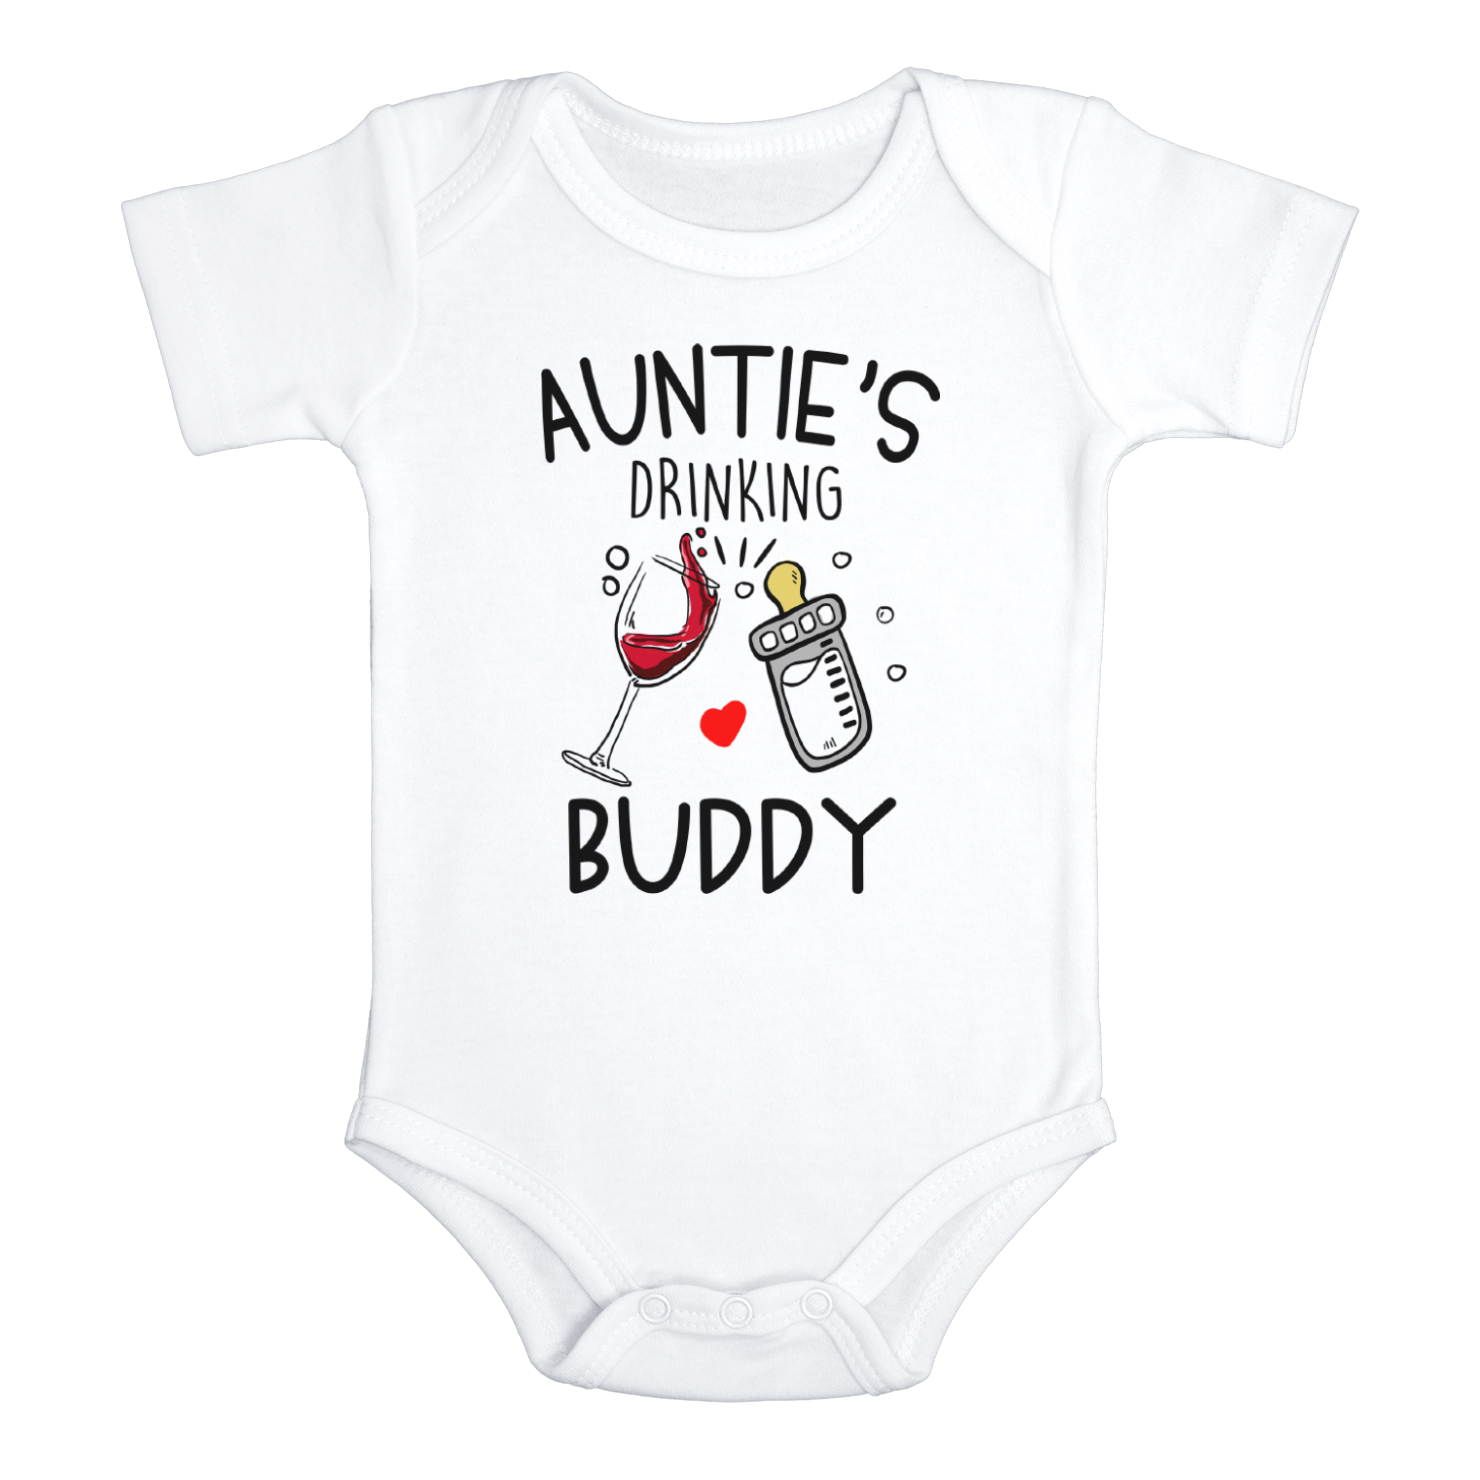 New Aunt Shirt, New Auntie Gift, Aunt Tshirt, Auntie T Shirt, Gift for Aunt, Auntie's Drinking Buddy Tee, Aunt Birthday Shirt, Aunt Tee